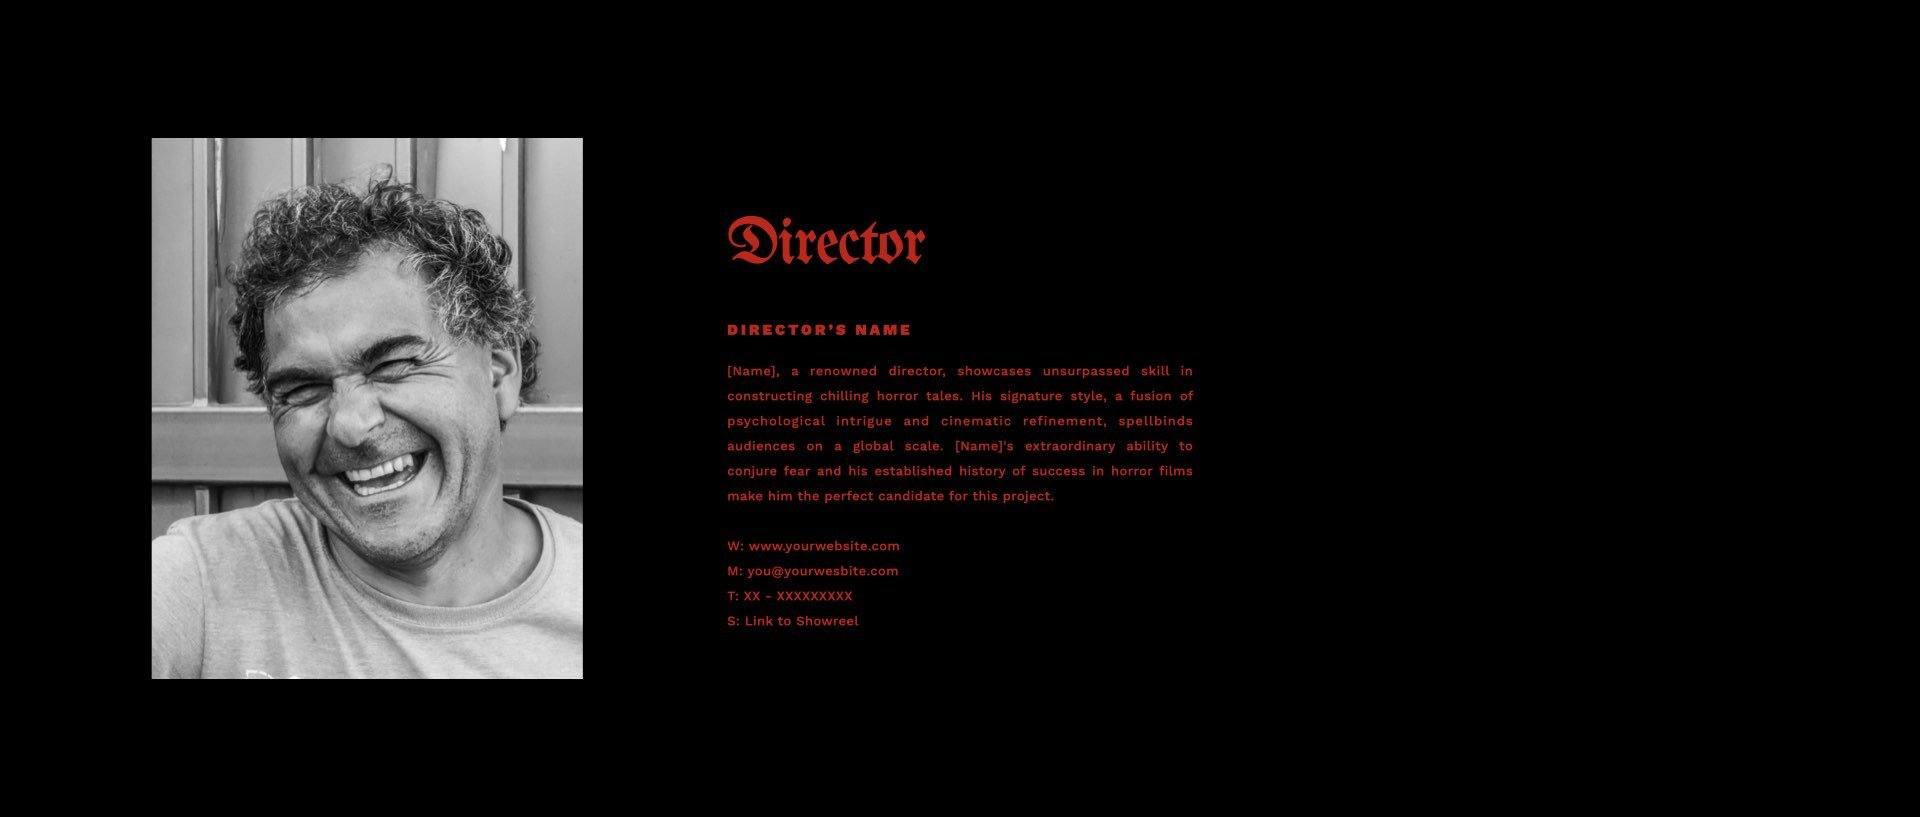 ‎Film Pitch Deck Template - Sinister Obsession.‎026.jpeg